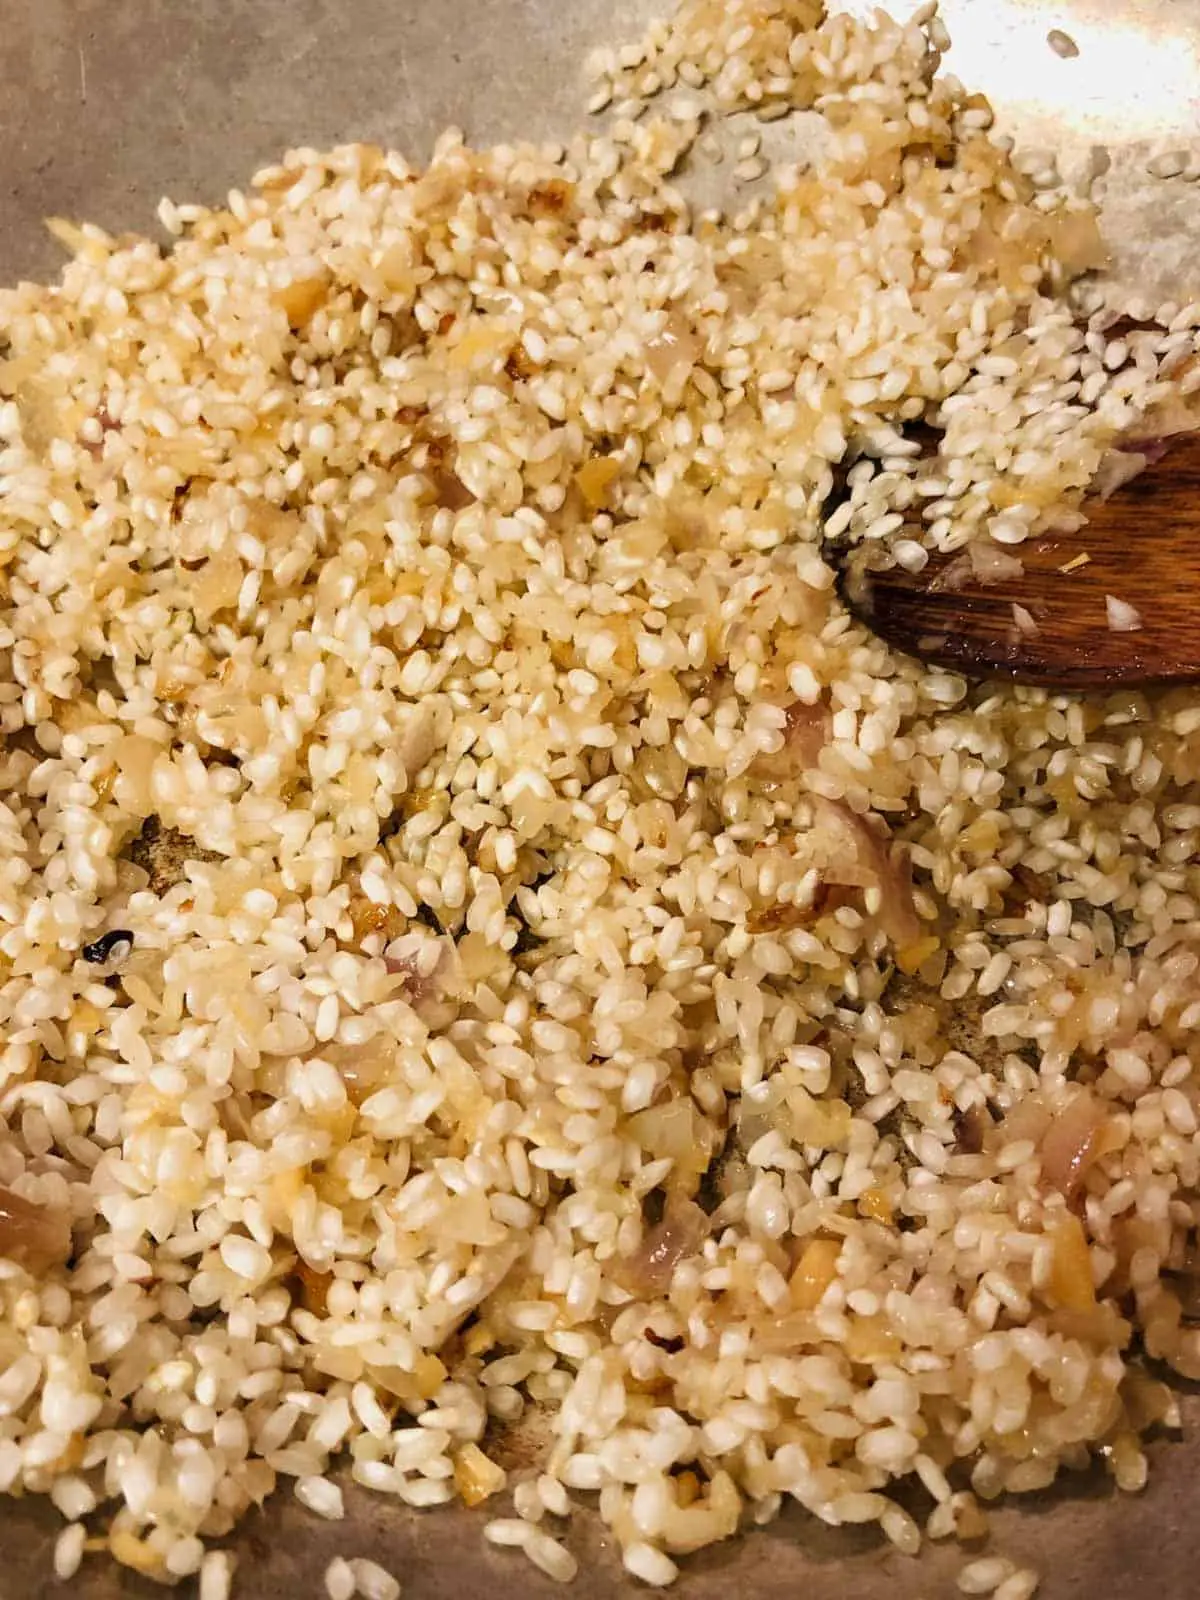 Arborio rice mixed with shallots and garlic in a skillet with a wooden spoon on the right side.